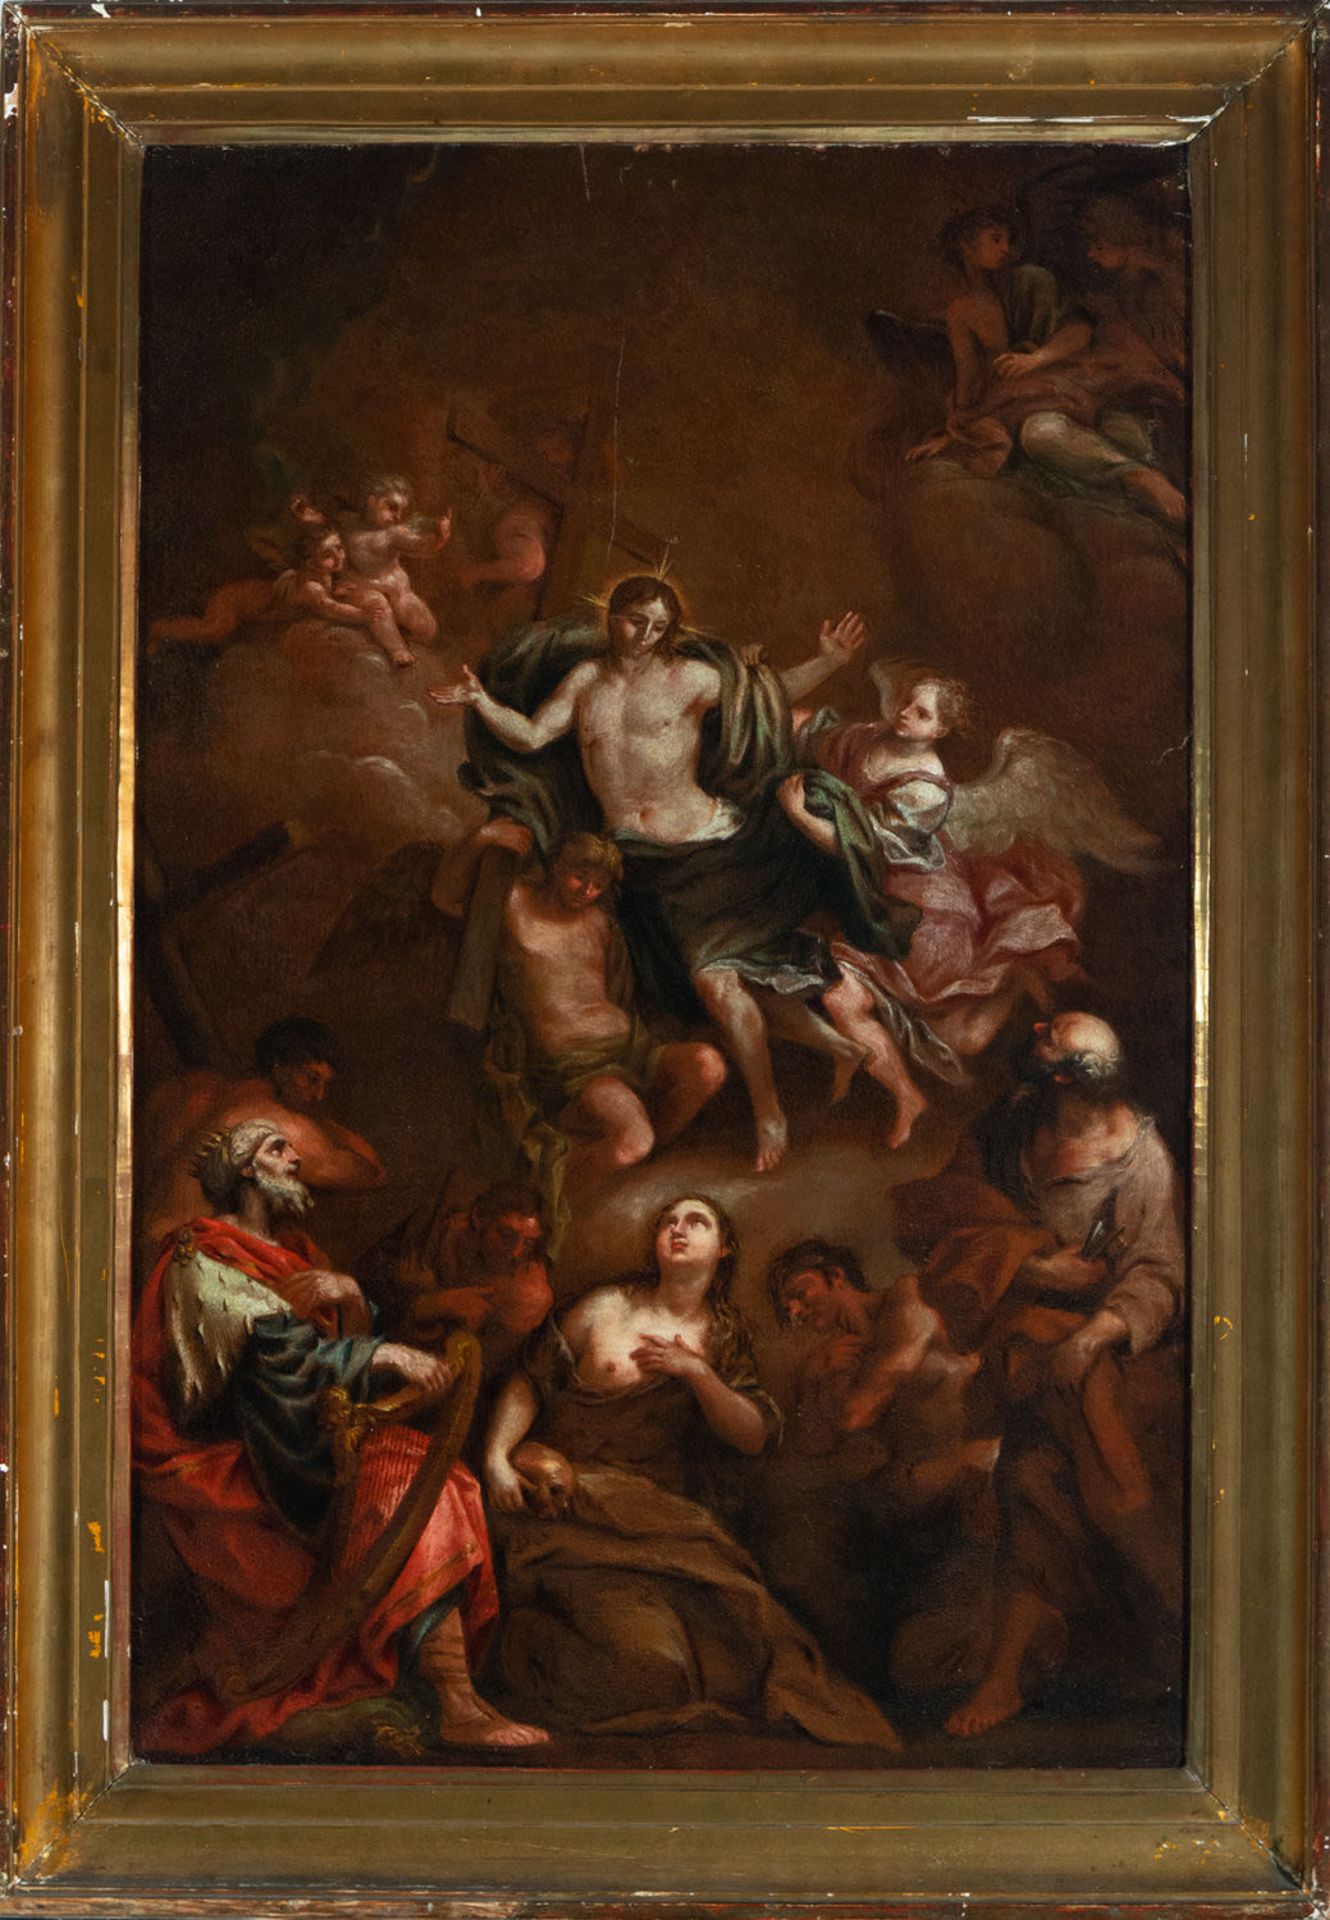 The Ascension of Christ, 17th century Italian school - Image 3 of 8